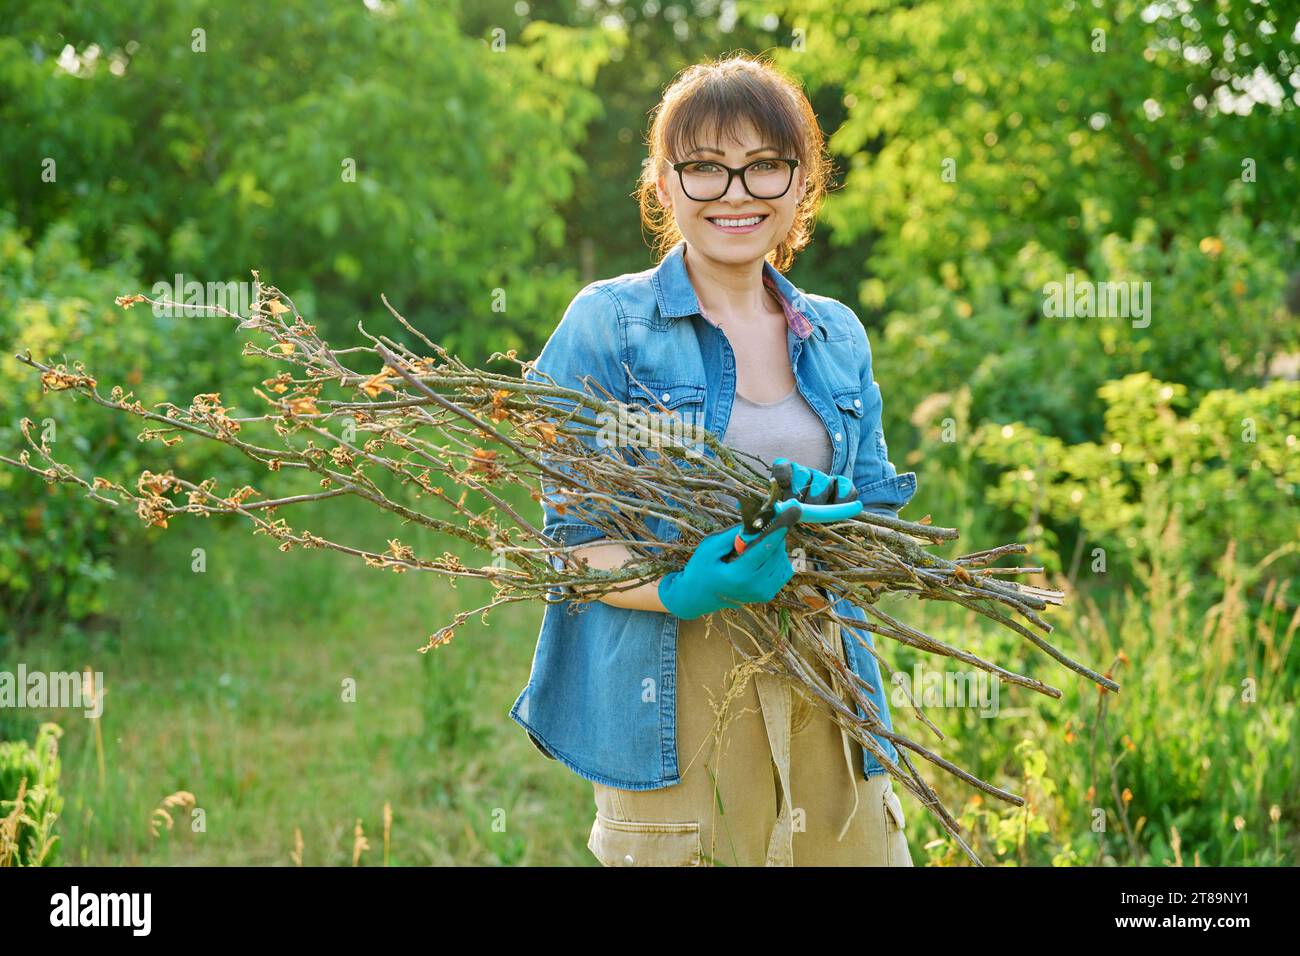 Woman with dry branches of blackcurrant bushes, pruning shears in garden Stock Photo